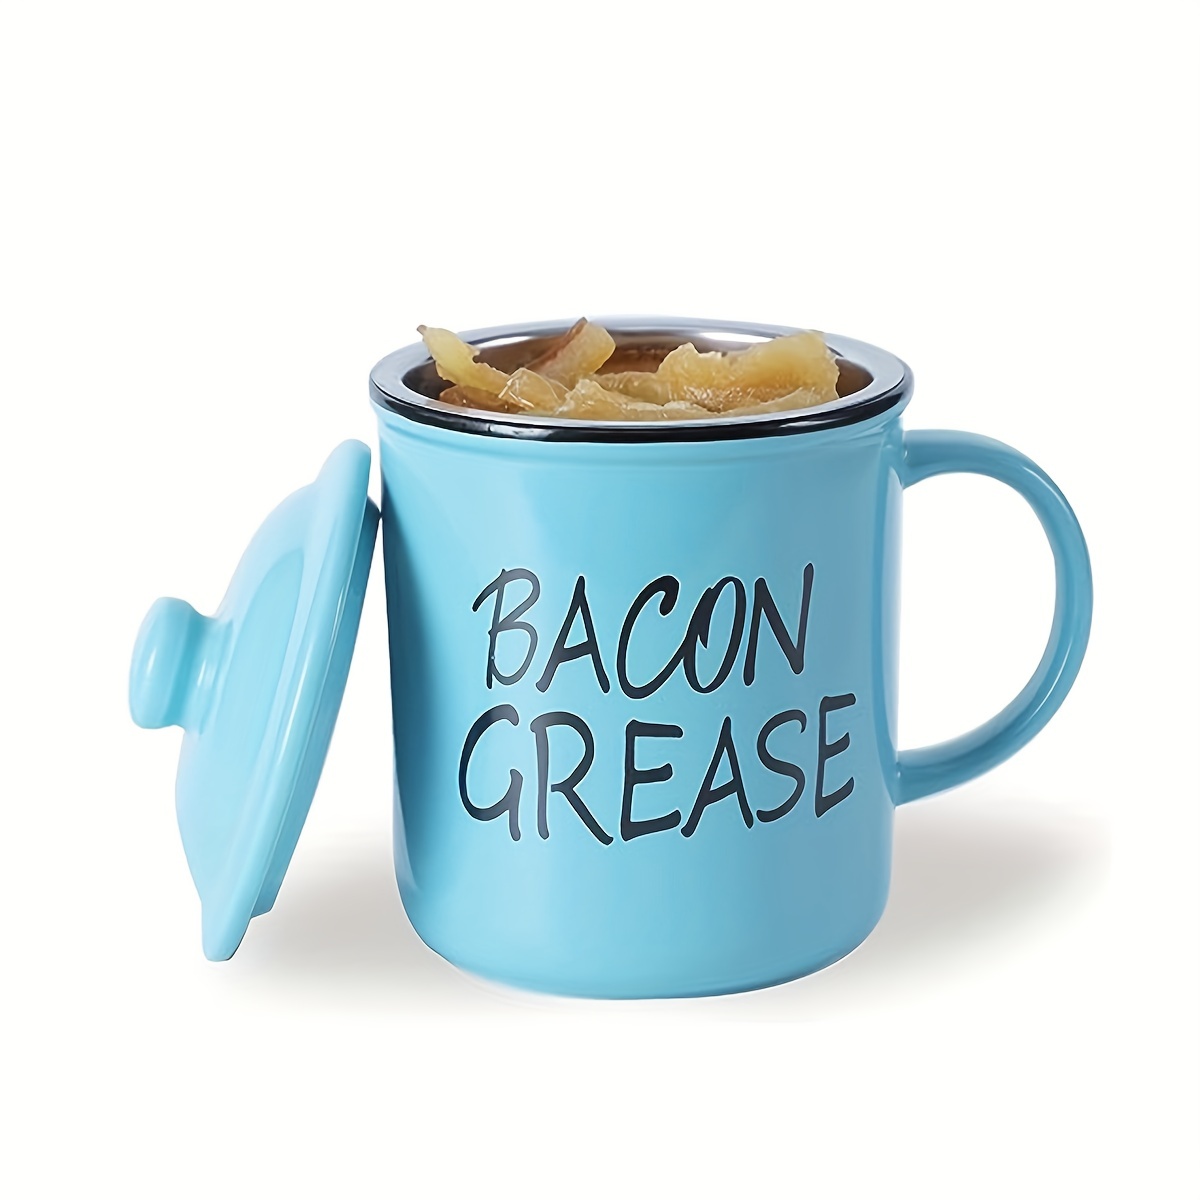 Ceramic Bacon Grease Container With Strainer And Lid, Bacon Grease